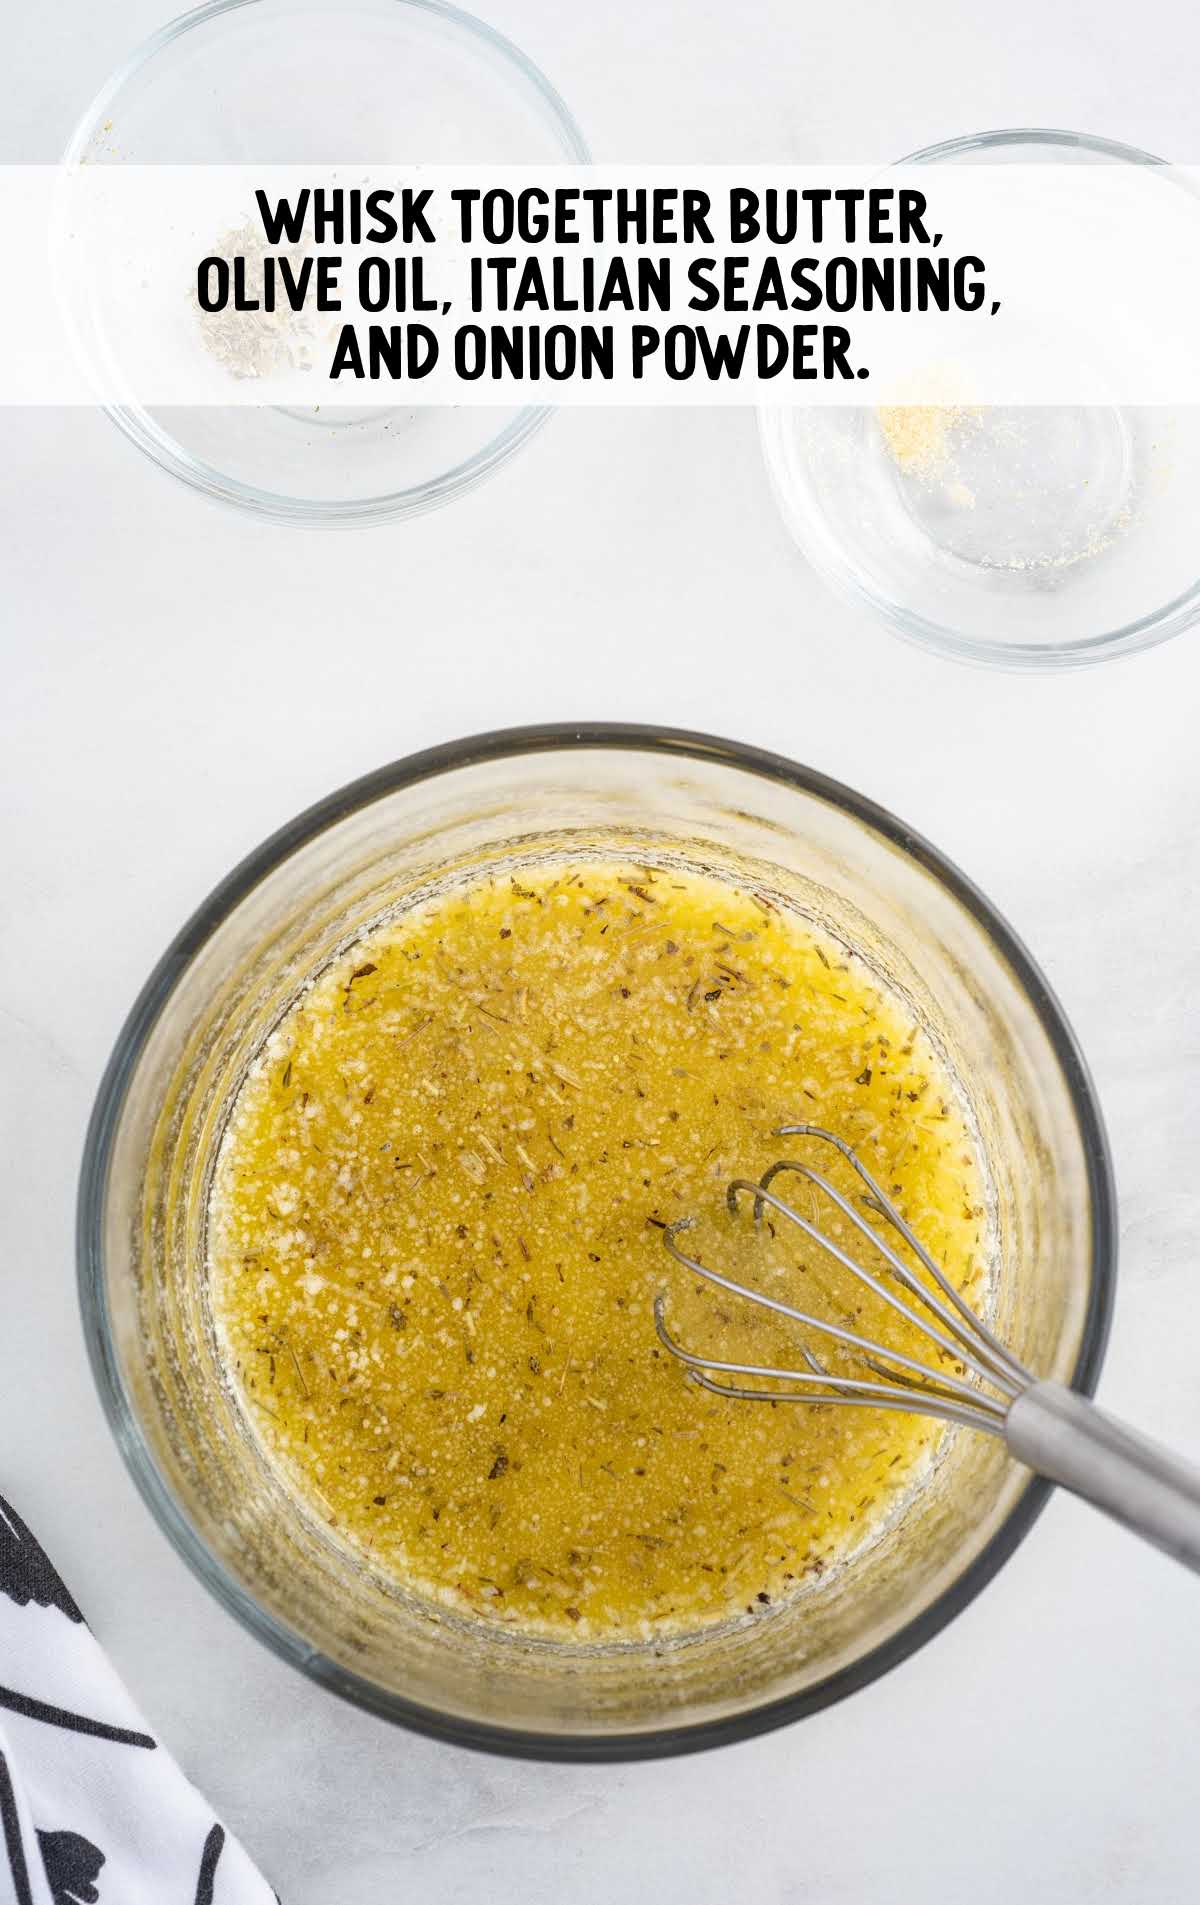 butter, olive oil, and seasonings whisked together in a bowl